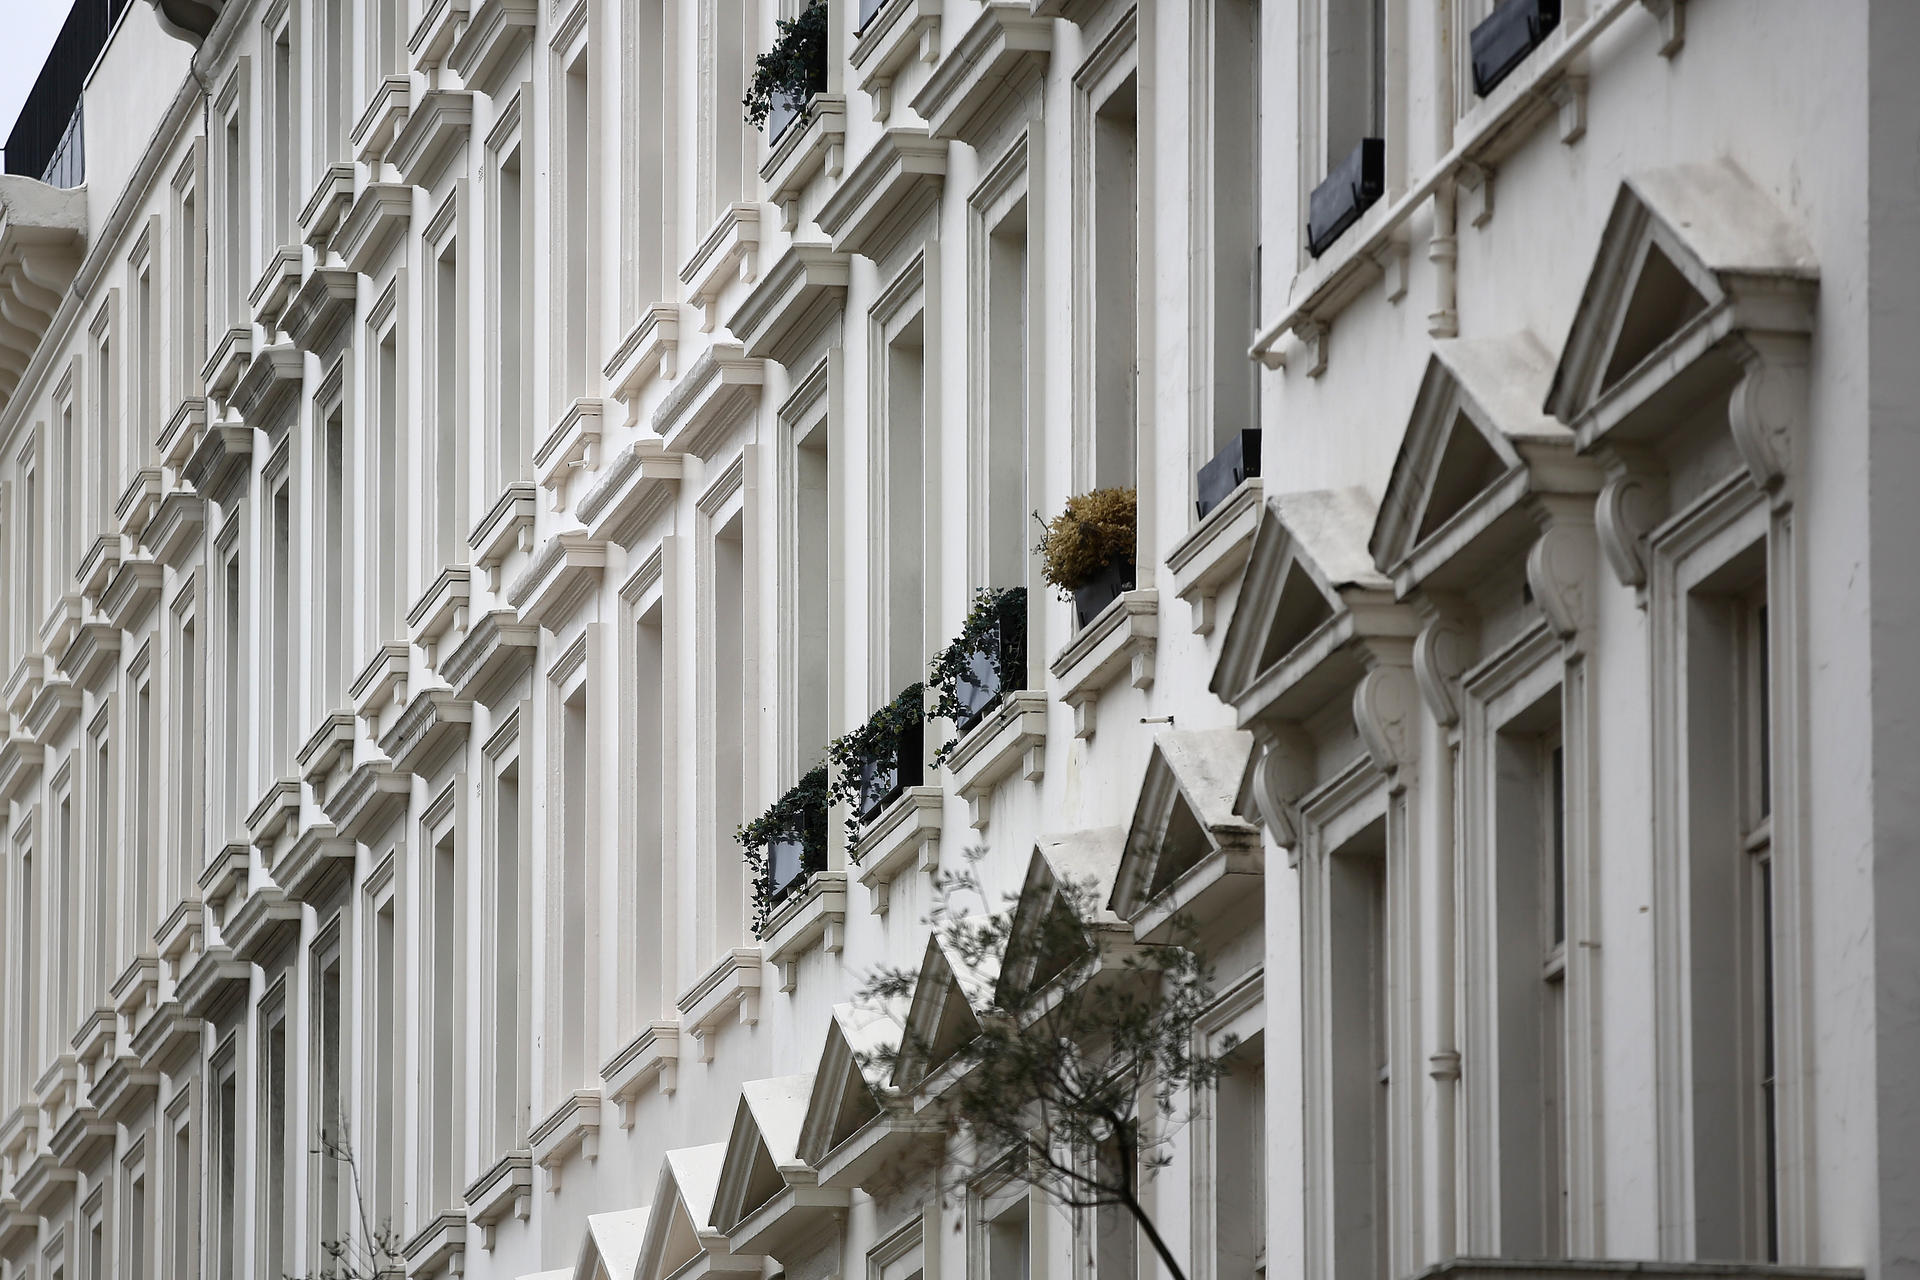 With prime central London property appreciating only about 2 per cent a year, buyers are seeking new pockets of value. Photo: Bloomberg